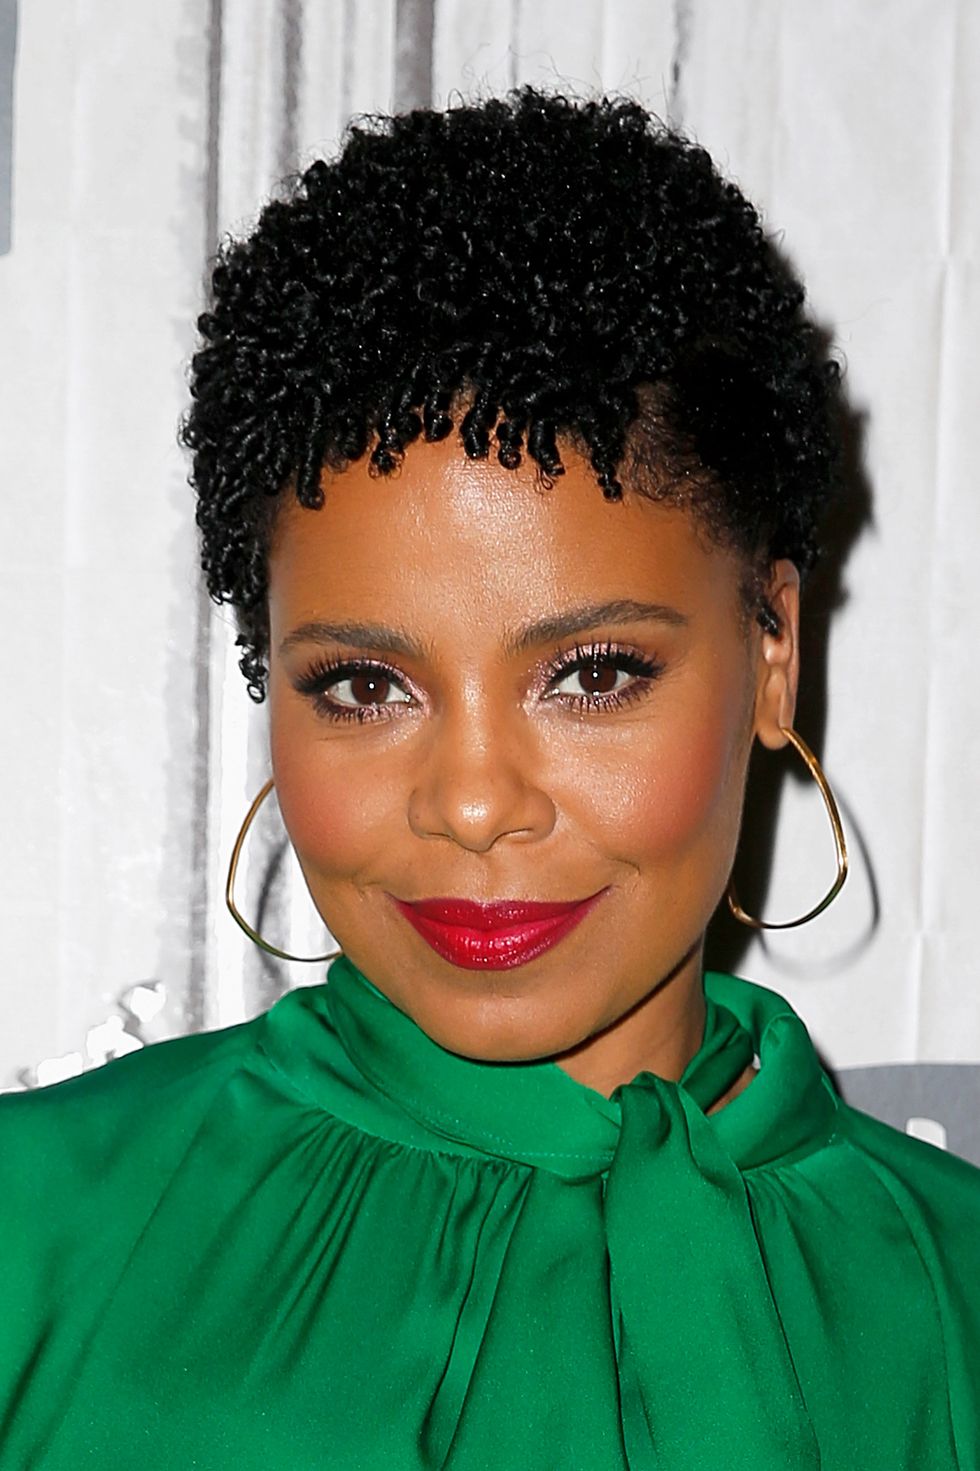 50 On-Trend Hairstyles for Black Women Who Want to Go Short This Year   Black women short hairstyles, Short afro hairstyles, Short hair black